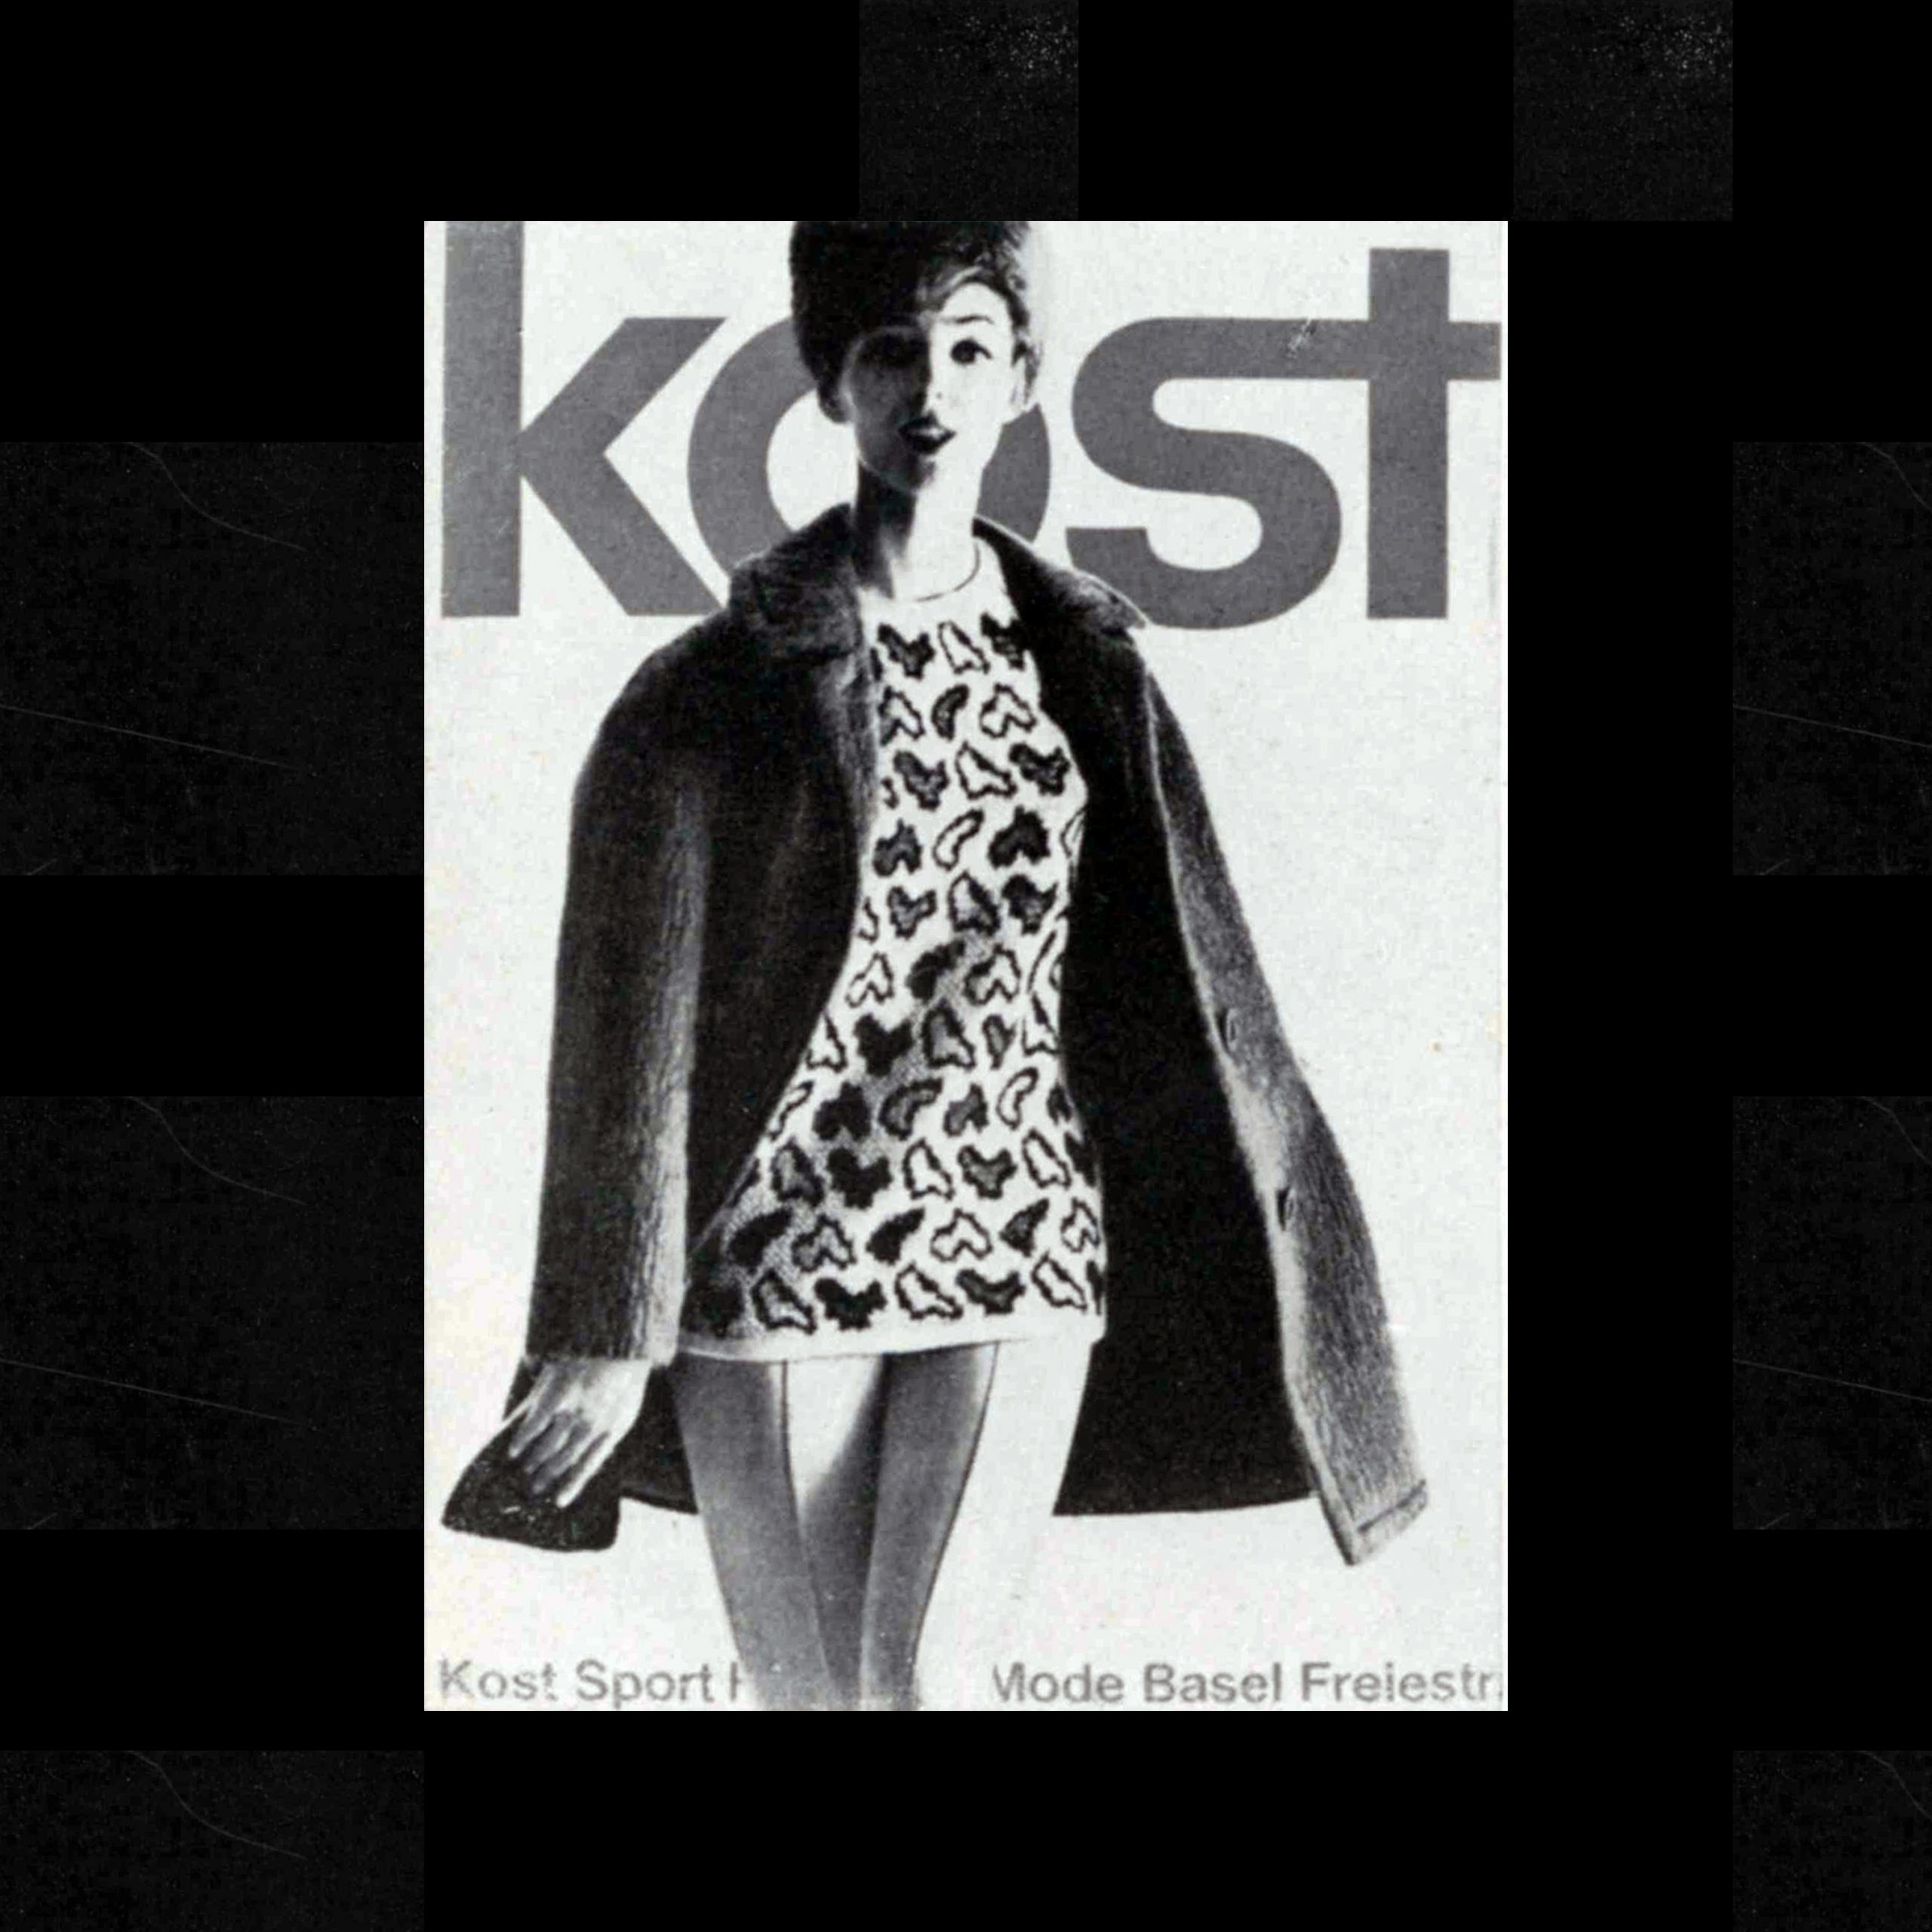 Poster for the Textile Factory Leonhard Kost & Co, Basel deigned by Hans-Peter Hort